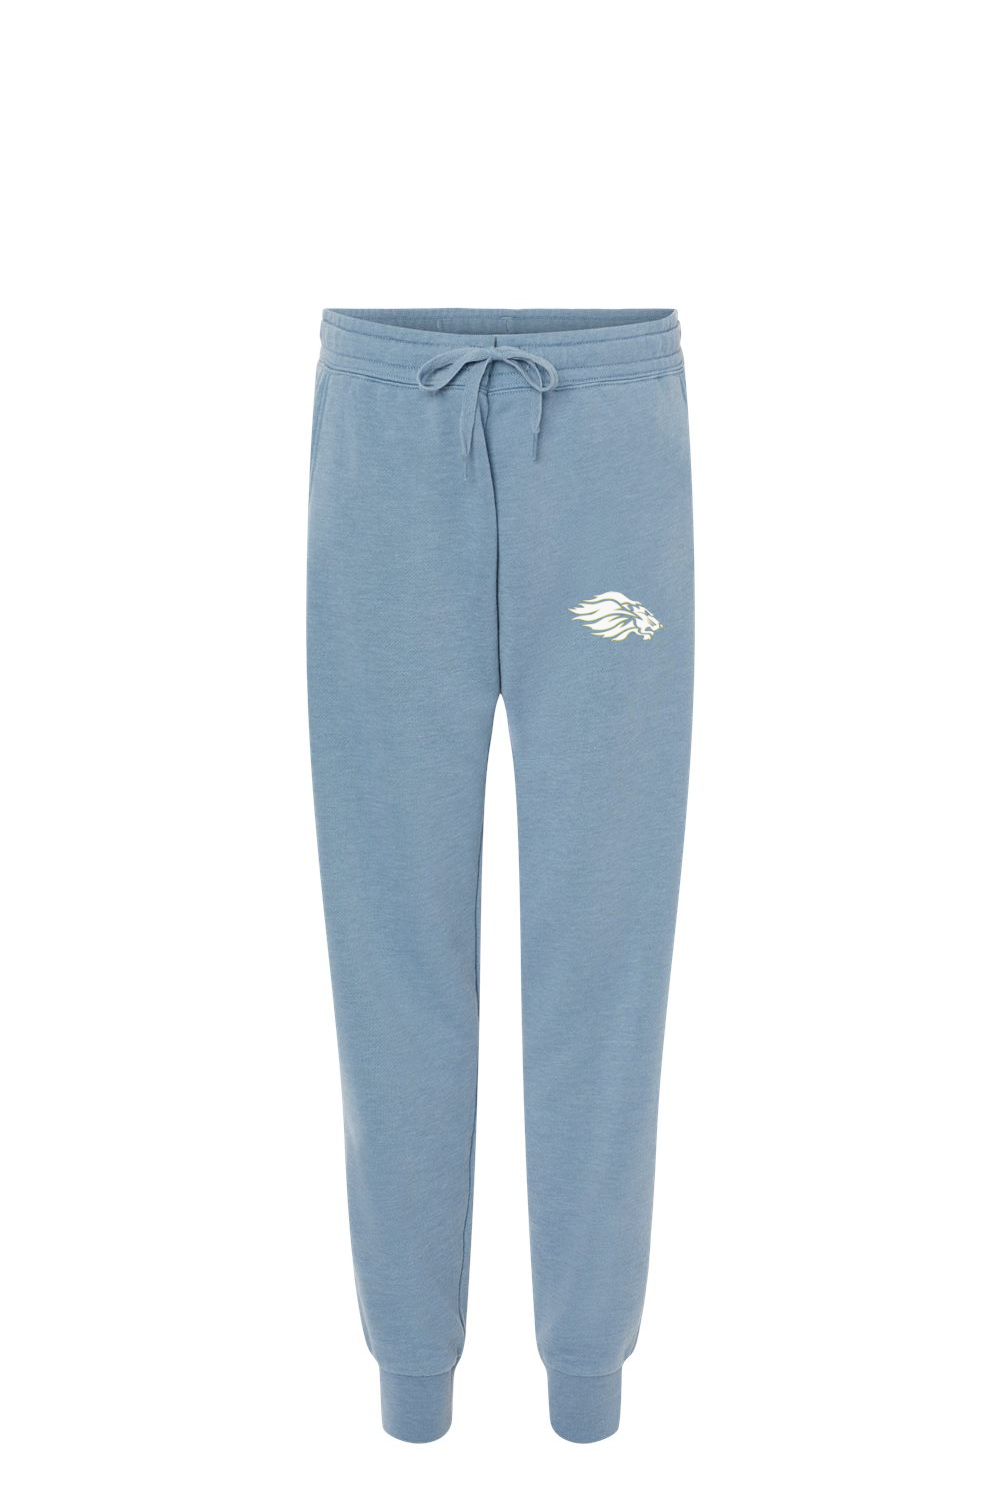 CCCS Lion Independent Trading Co. Women's California Wave Wash Sweatpants